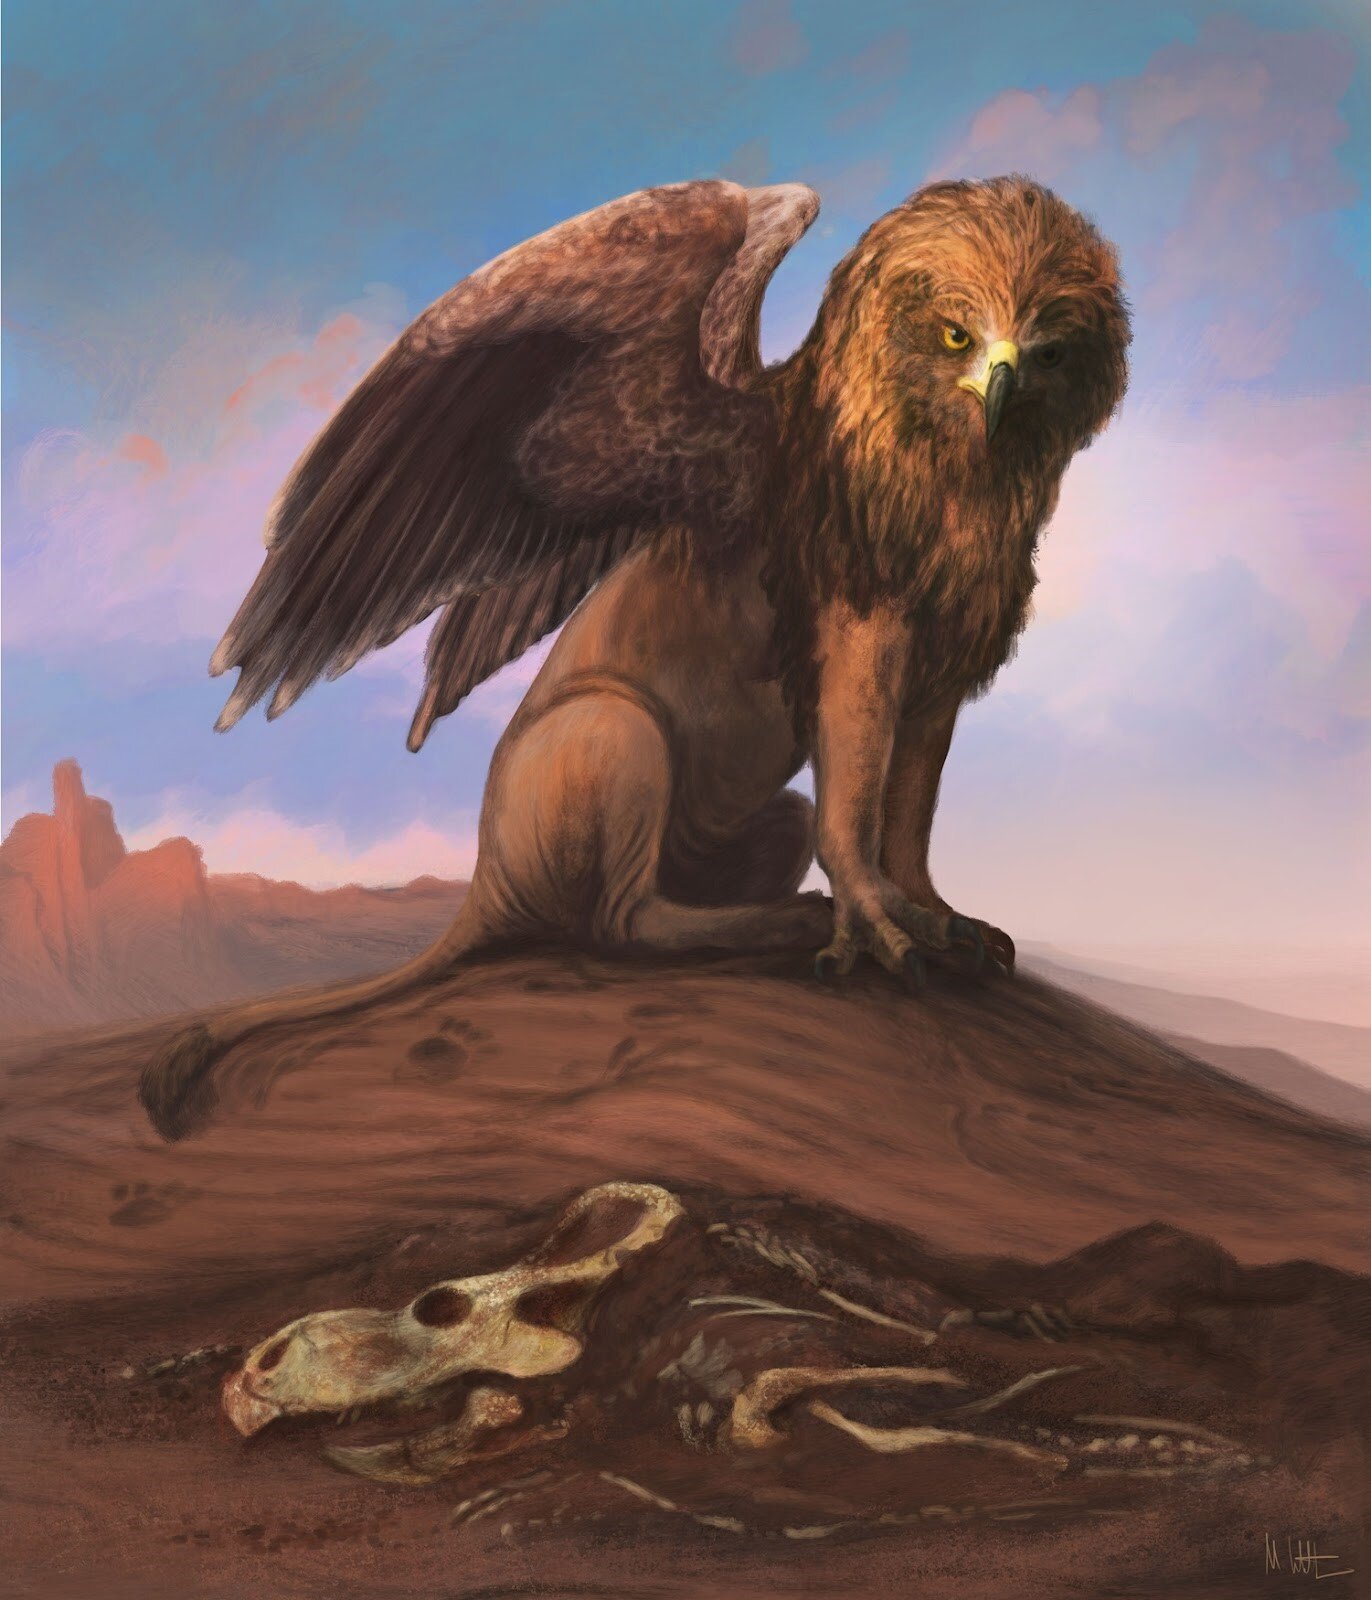 illustration of a griffin perched above a dinosaur skeleton